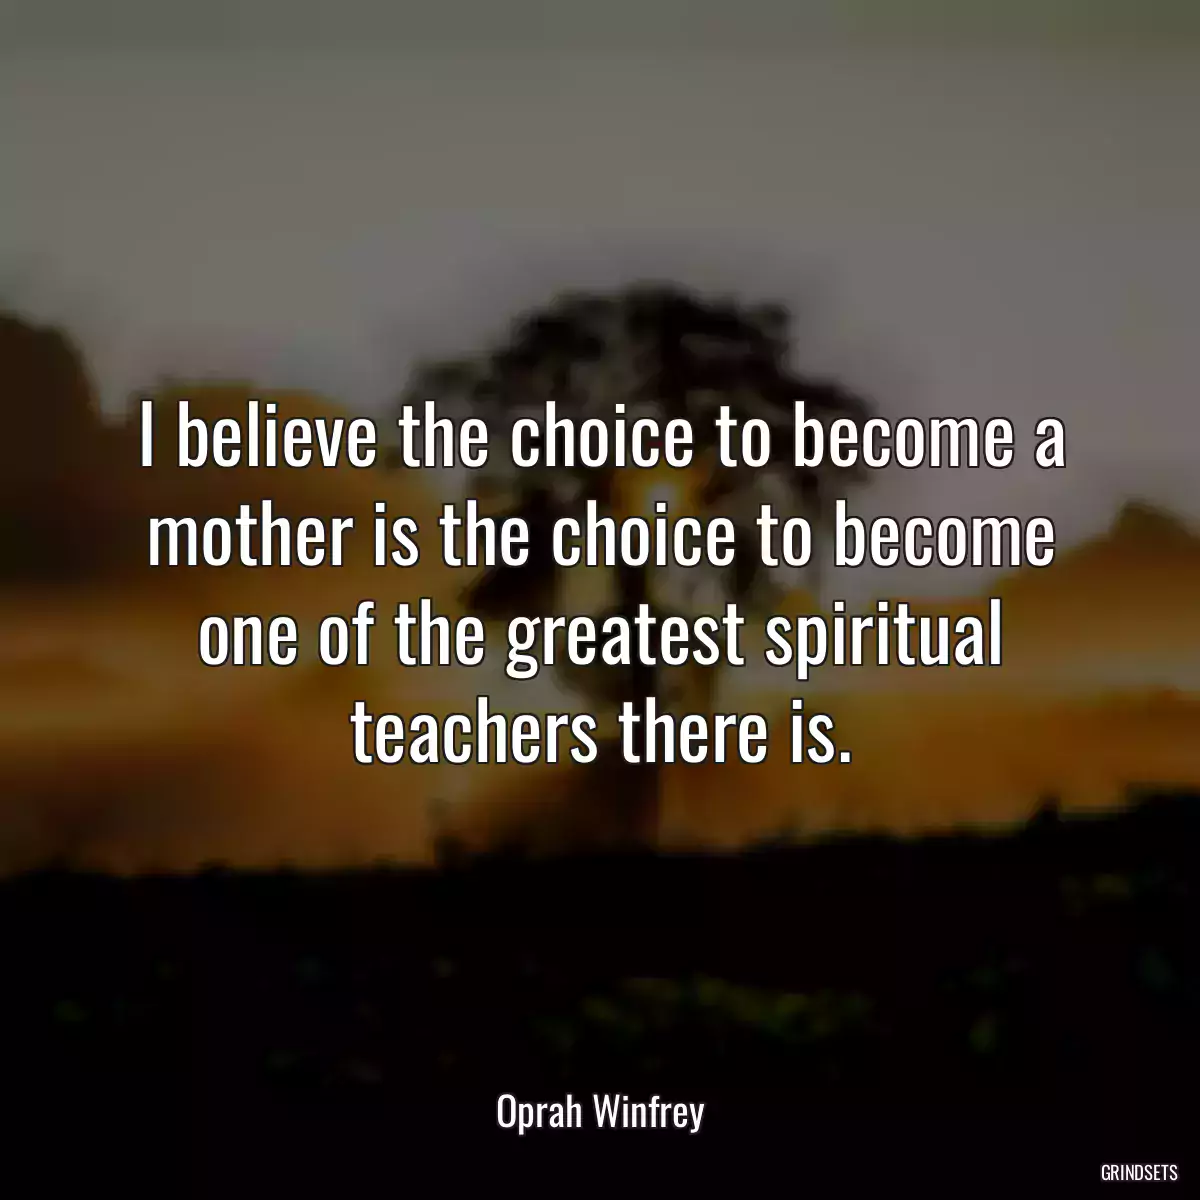 I believe the choice to become a mother is the choice to become one of the greatest spiritual teachers there is.